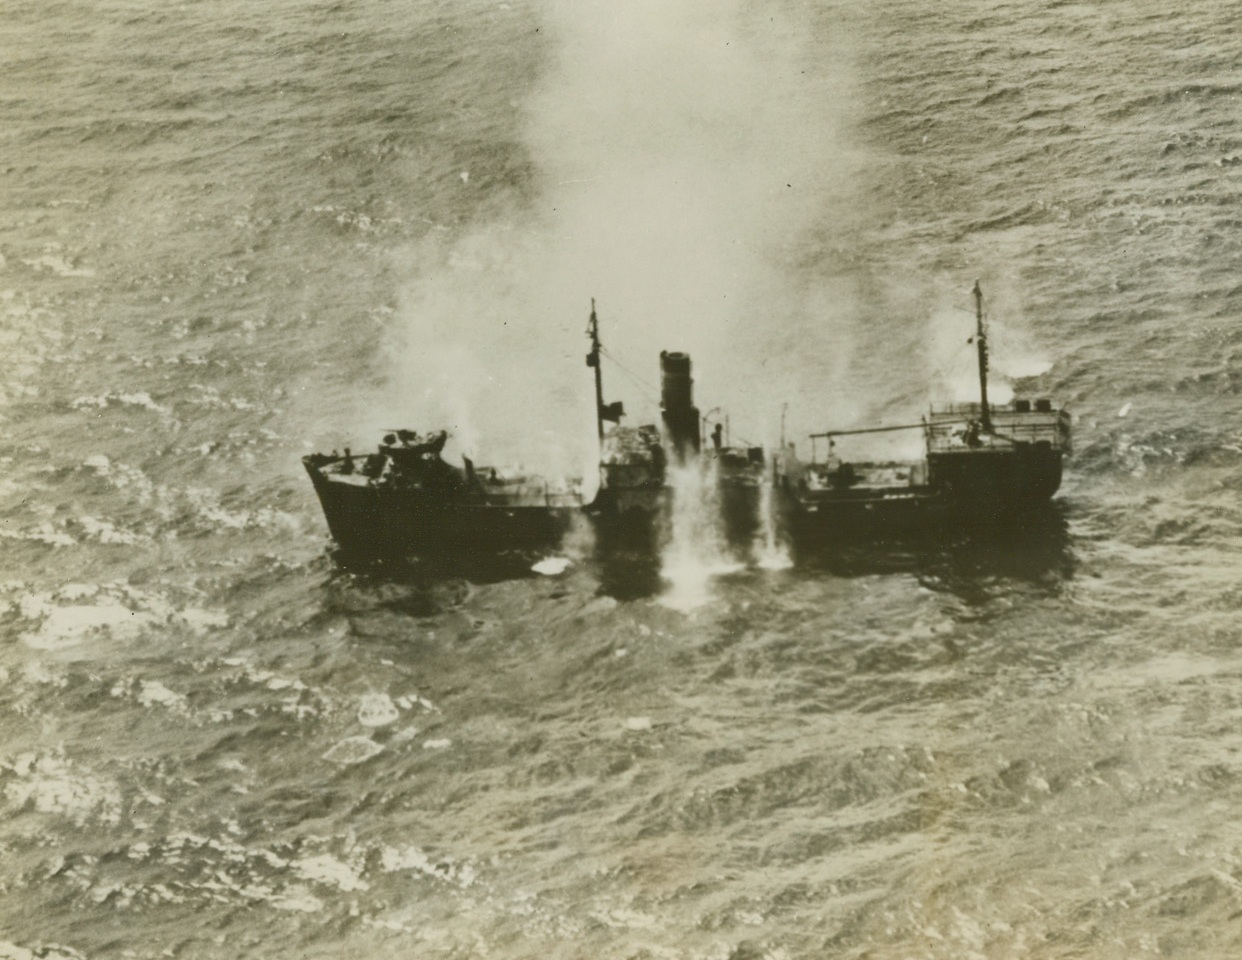 Special Delivery to Davy Jones, 2/19/1944. Engebi Island—A Jap medium size freighter is caught in an exploding net of bomb bursts, as Navy carrier planes send enemy supplies to the bottom of the sea, off Engebi Island, Eniwetok Atoll in the Marshalls. On a return trip to the Northwest Marshall Island Group, Navy fliers softened Eniwetok as Army and Marine assault troops stormed ashore. Credit: US Navy photo from ACME;